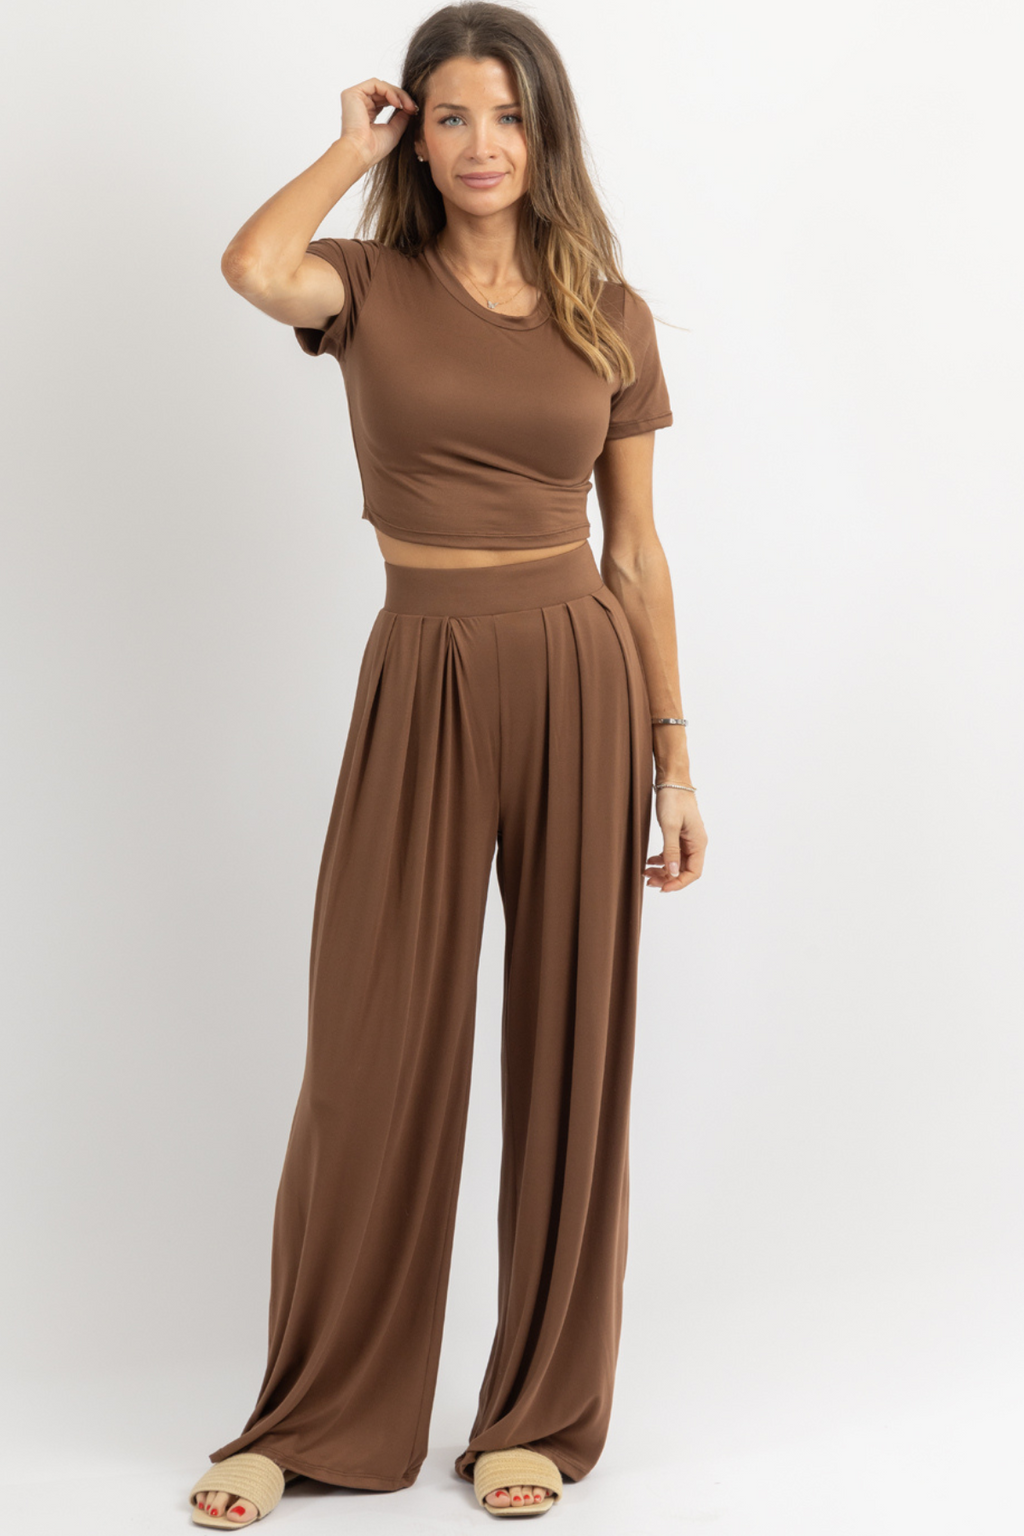 BUTTER SOFT BROWN PALAZZO PANT SET